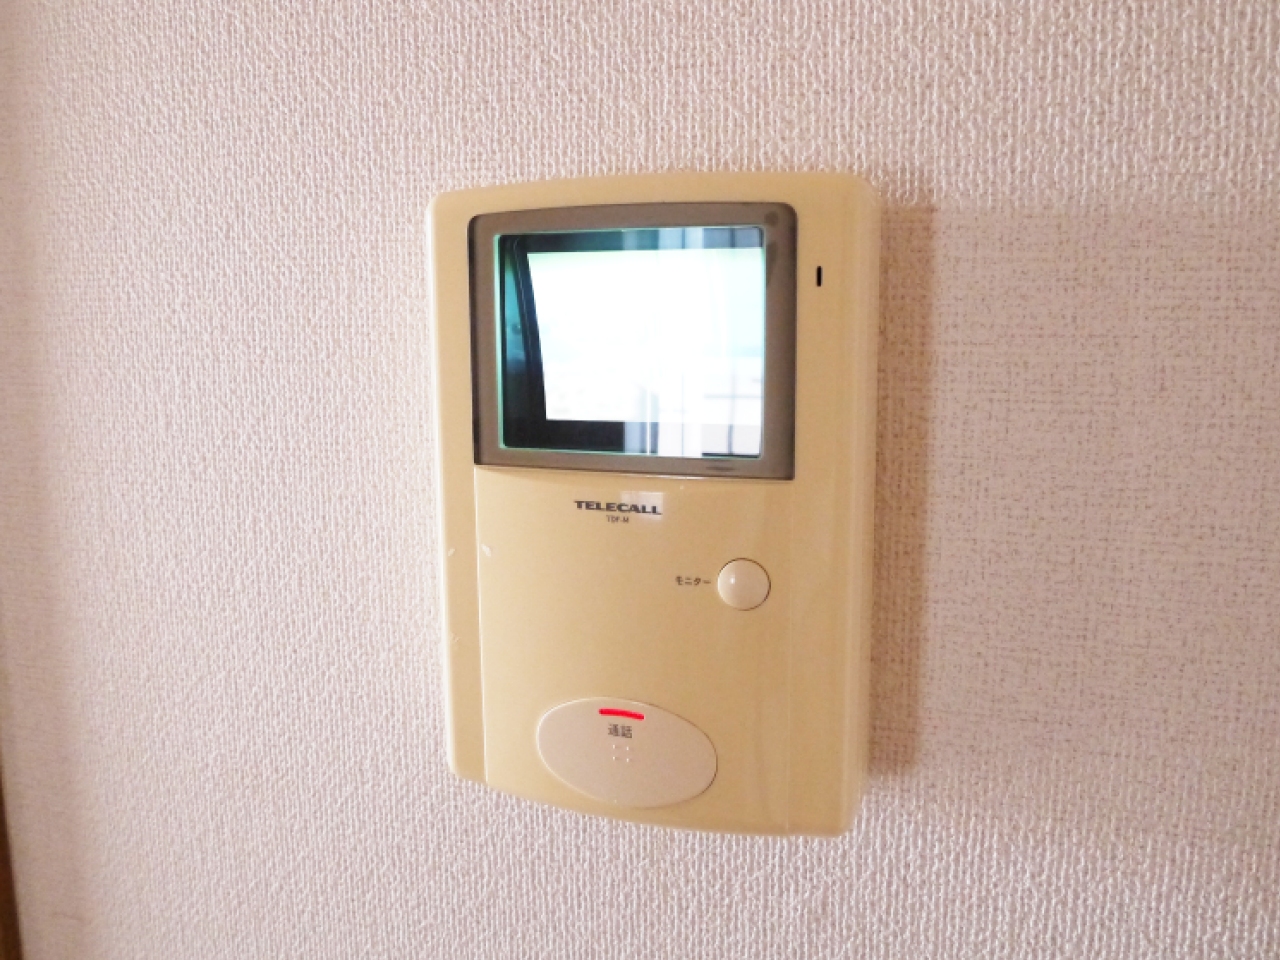 Other room space. It is safe for sudden visitors since TV that with intercom. 